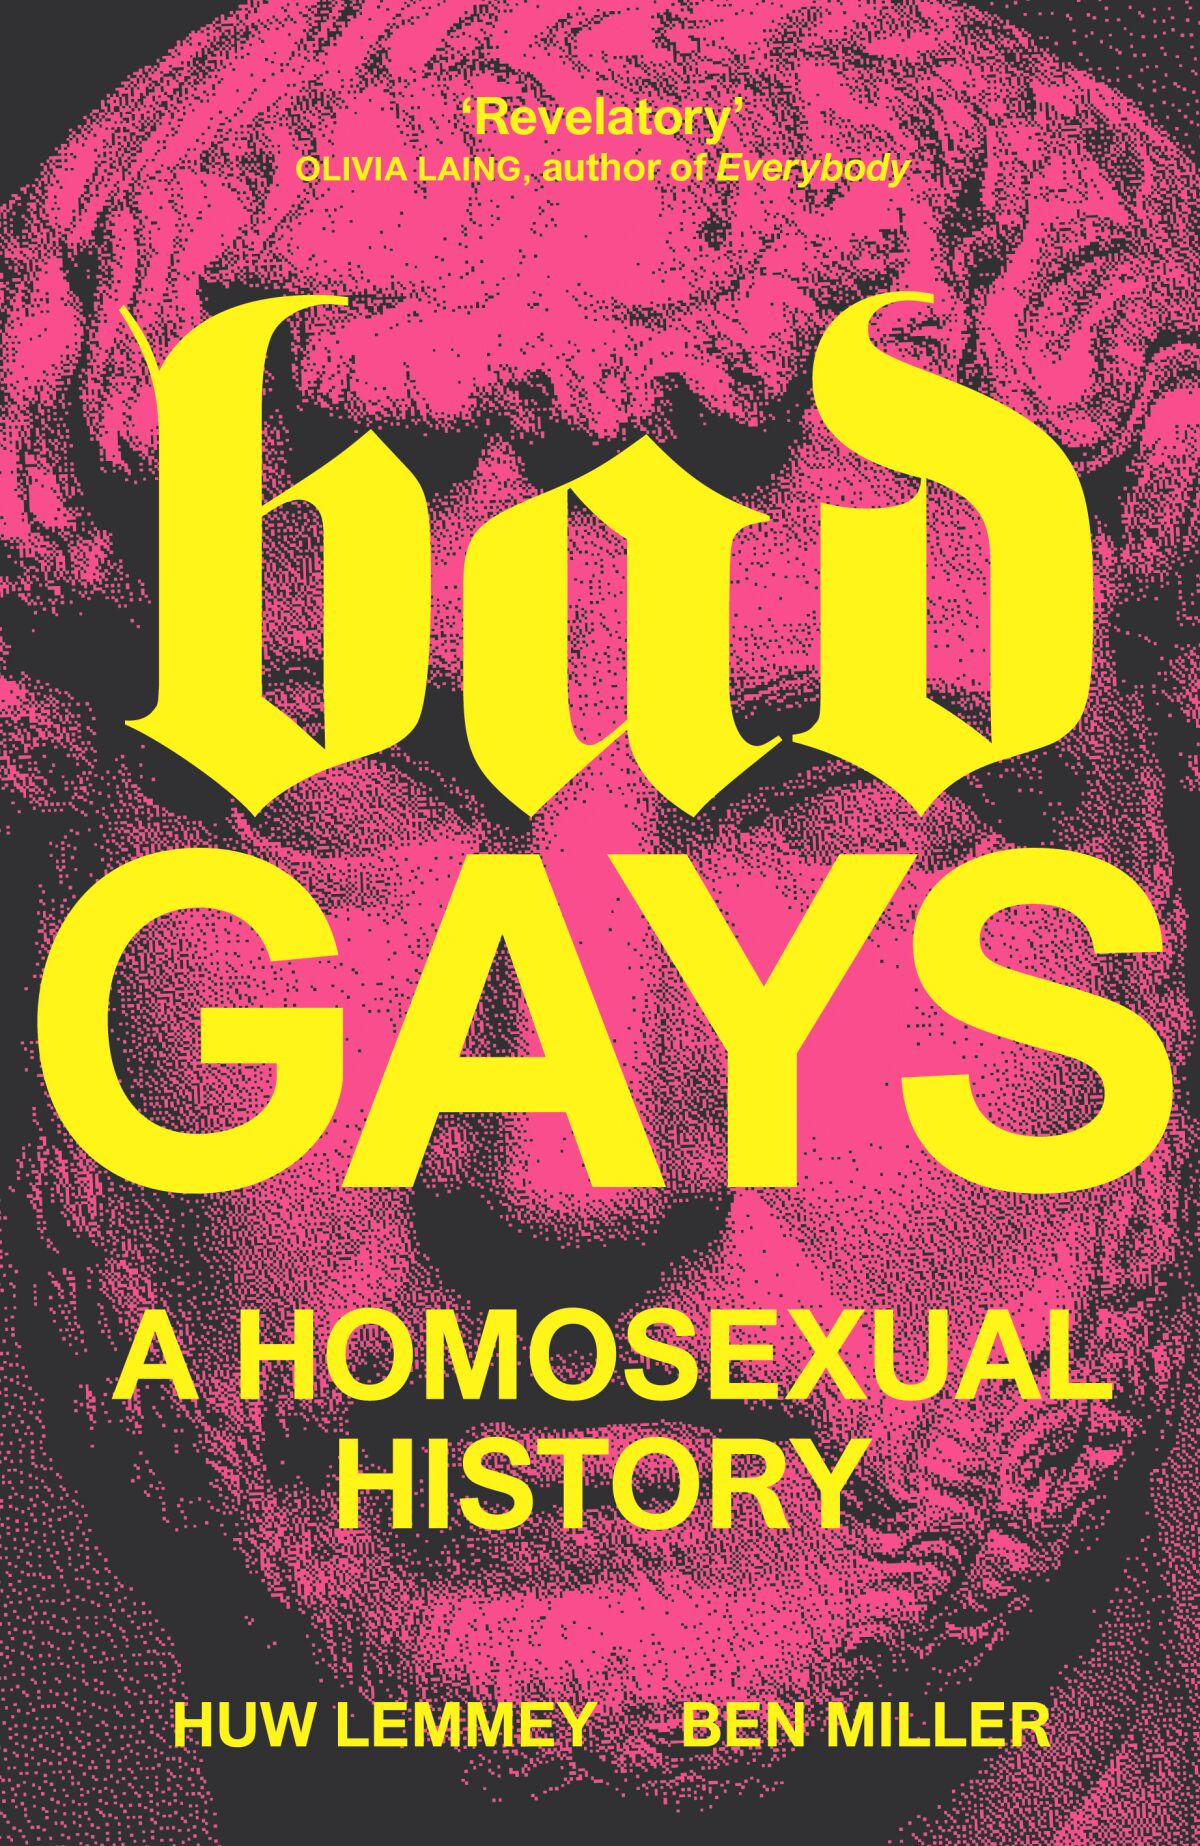 "Bad Gays: A Homosexual History" by Huw Lemmey and Ben Miller